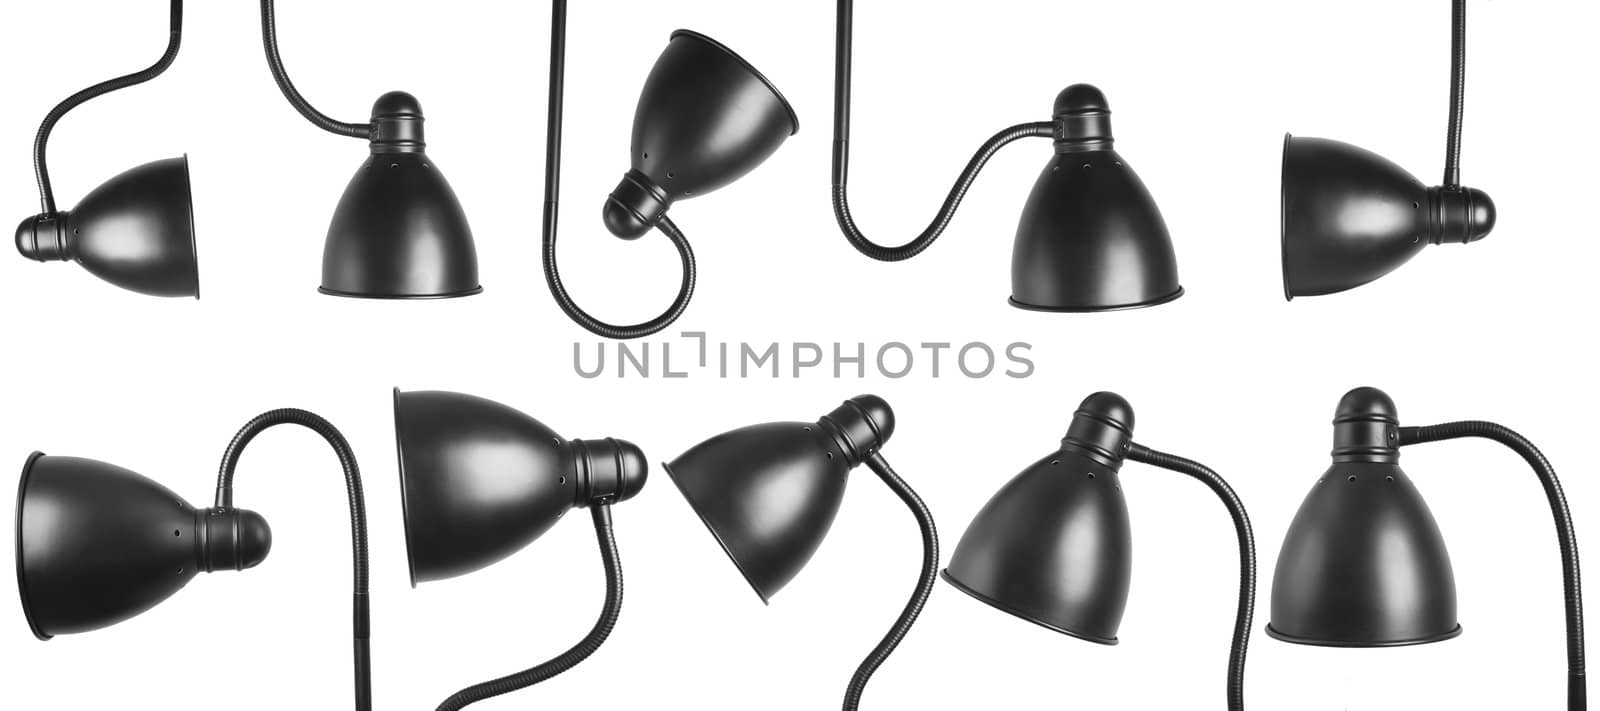 different view of metalic black lamp isolated on white background 